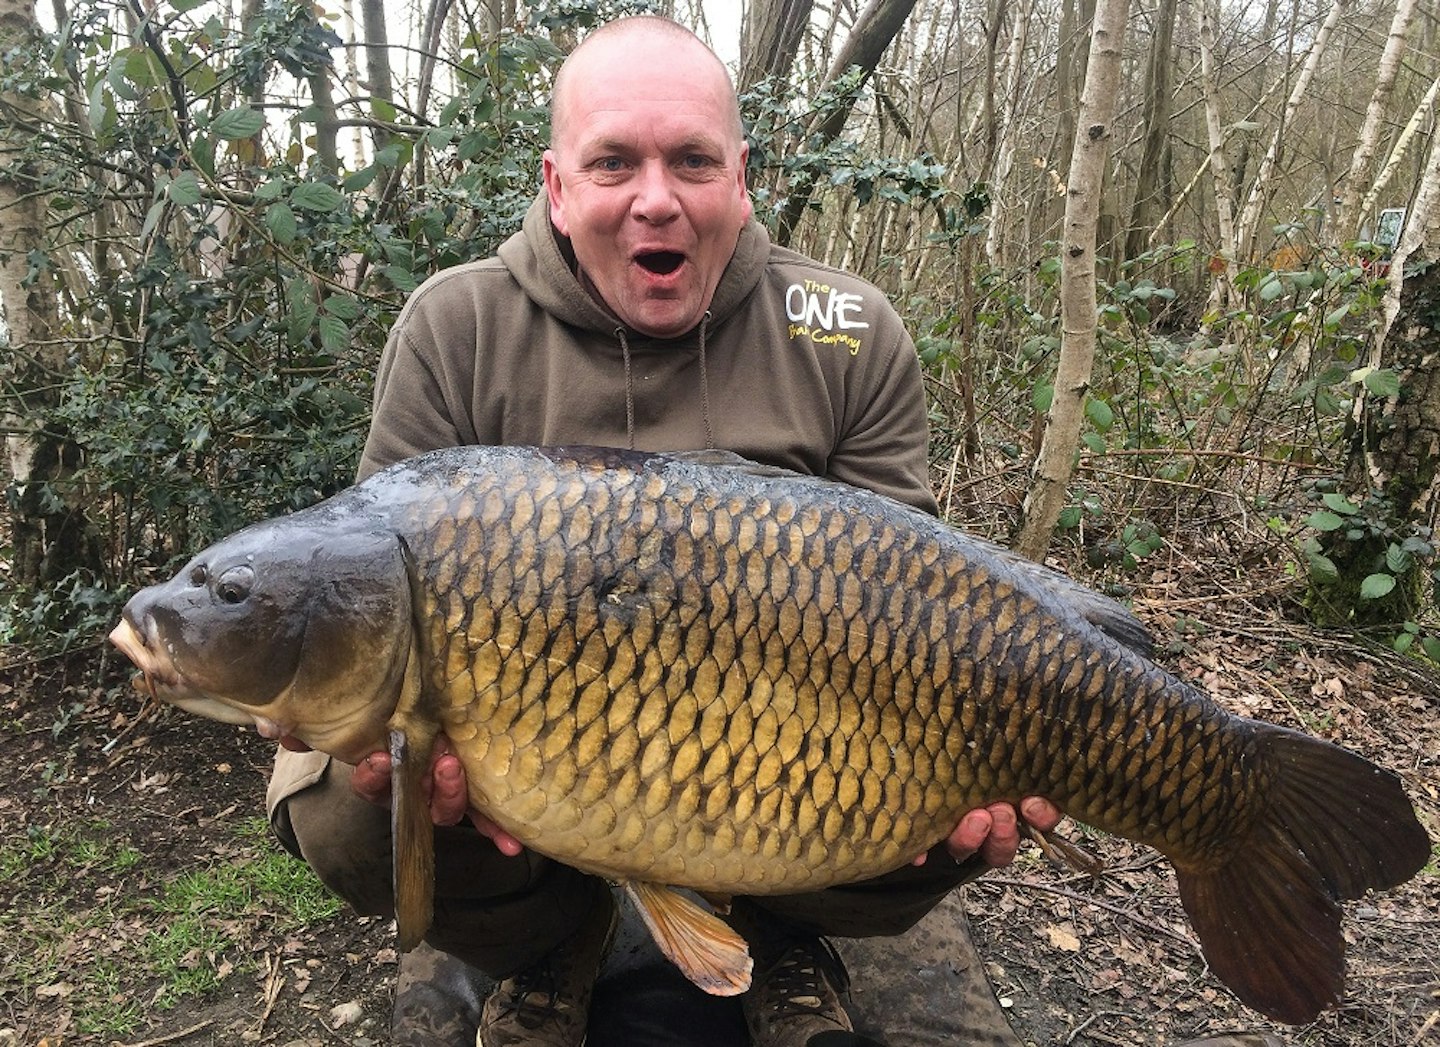 No wonder Paul White is shocked at this 43lb common